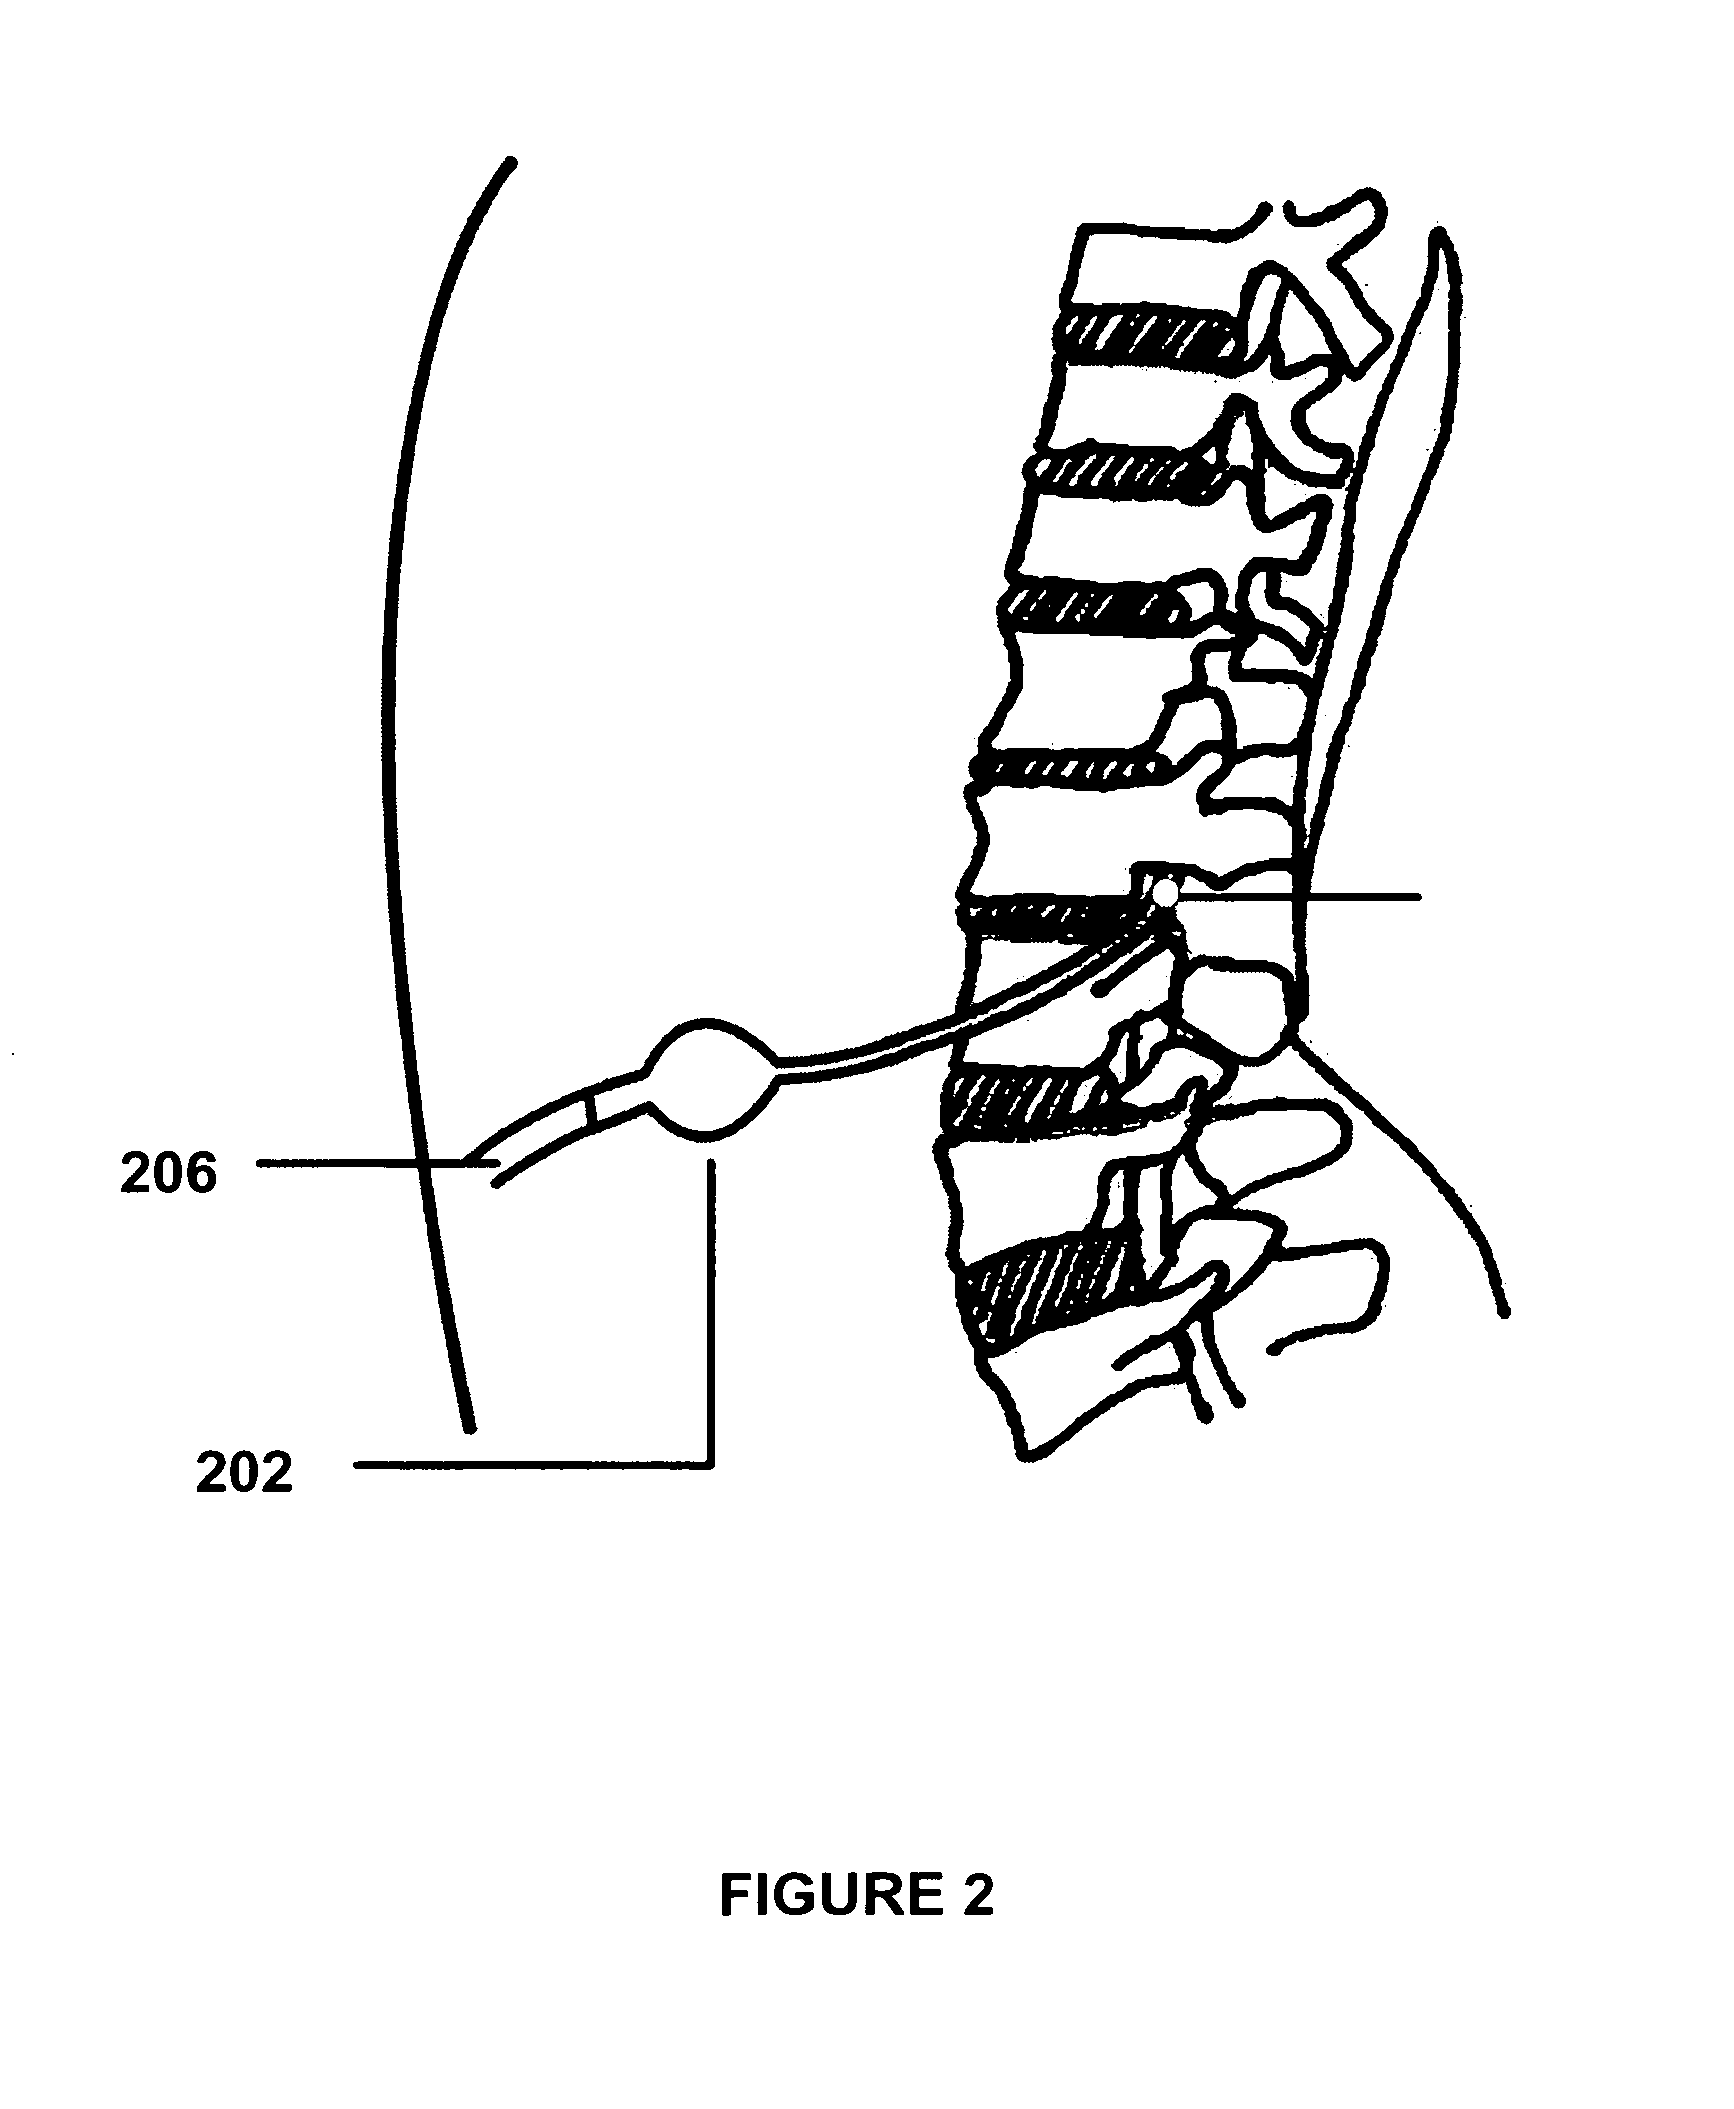 Method and apparatus for removing harmful proteins from a mammalian's ventricular cerebrospinal fluid